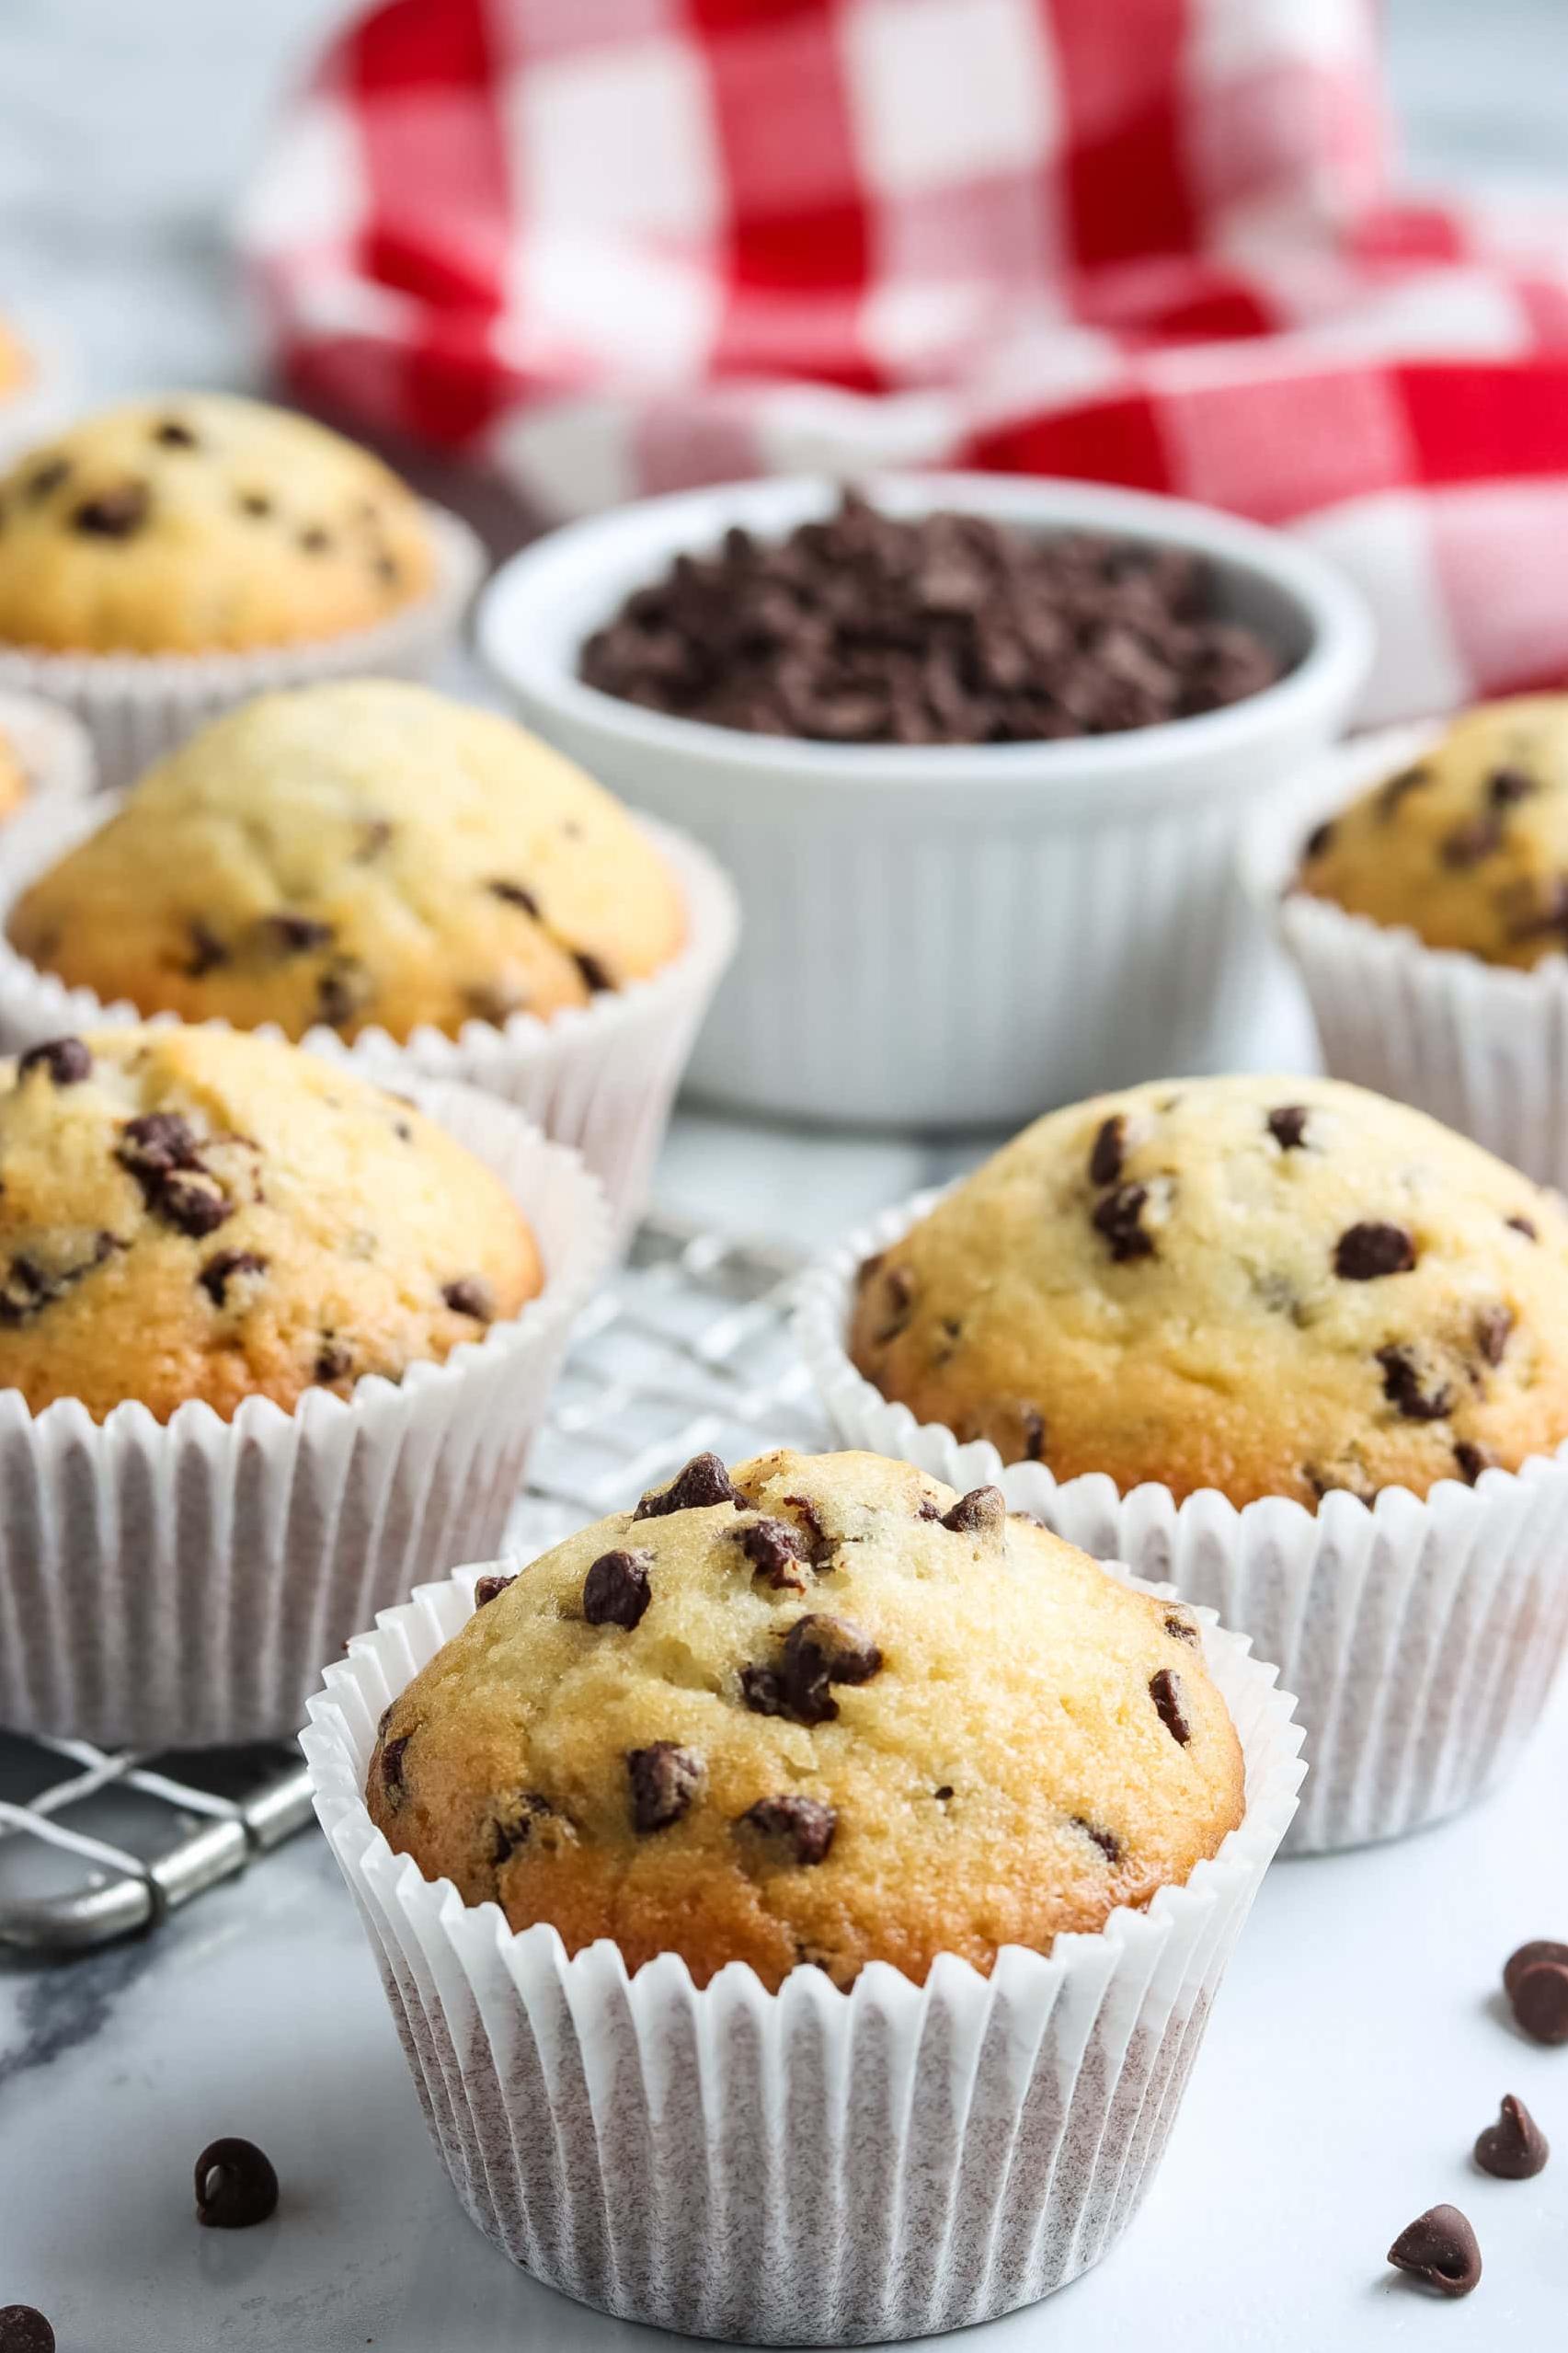 Super Easy and Delicious Chocolate Chip Muffins Recipe